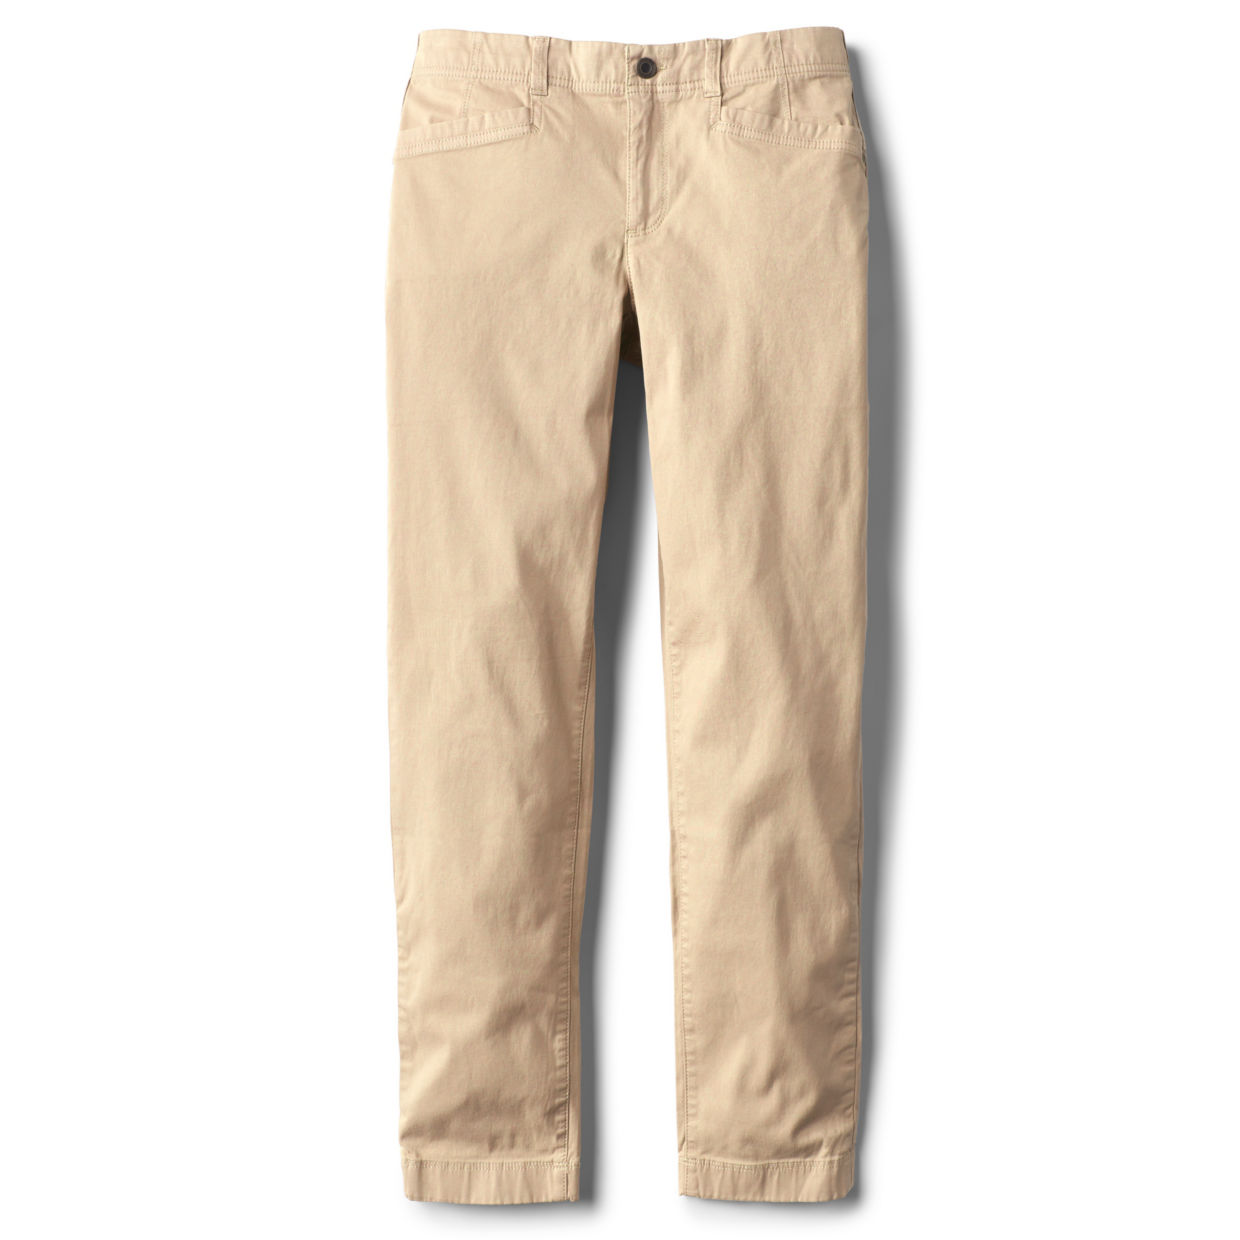 Everyday Chino Natural Fit Straight-Leg Ankle Pants